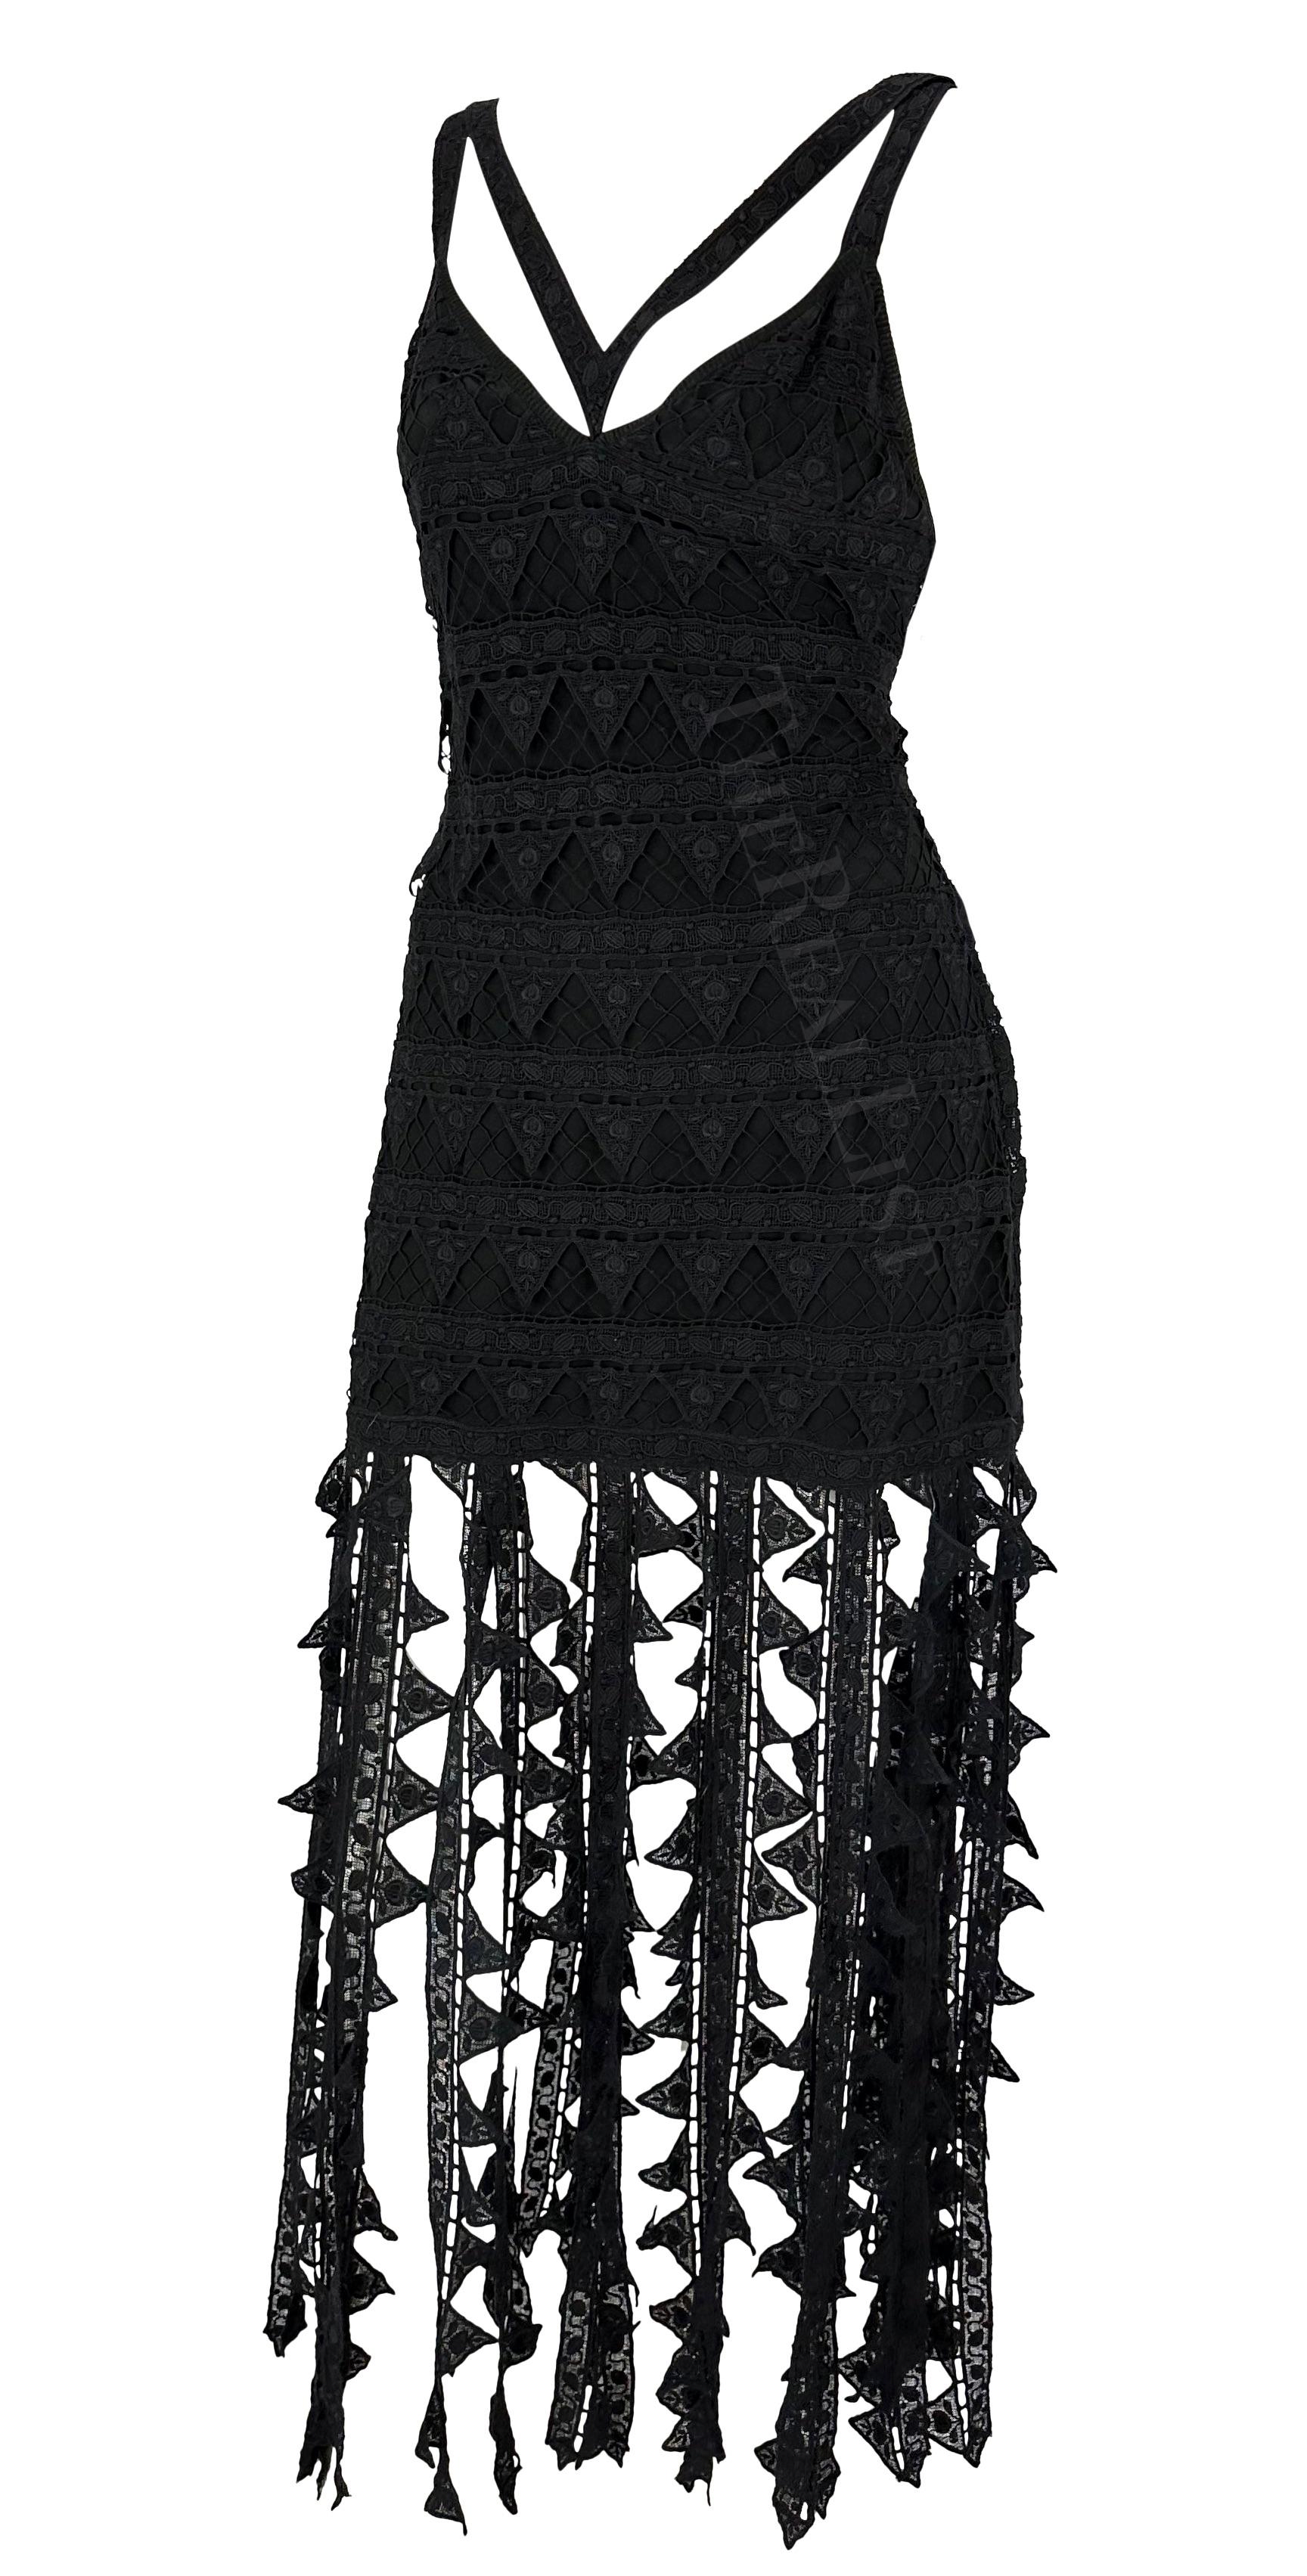 S/S 1993 Chloé by Karl Lagerfeld Runway Black Floral Triangle Lace Dress In Excellent Condition For Sale In West Hollywood, CA